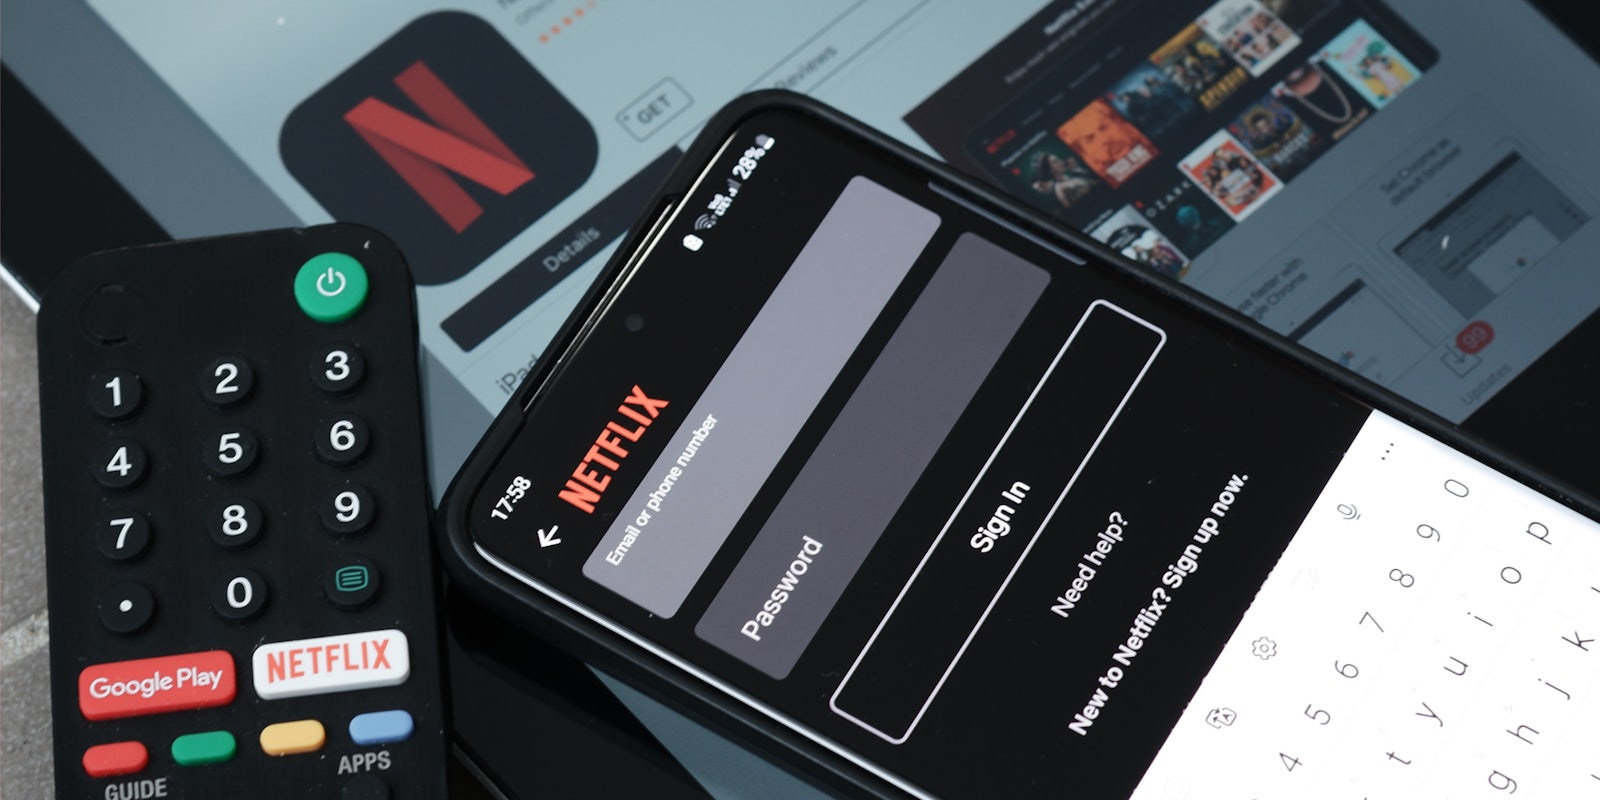 Netflix open on phone and tablet with remote